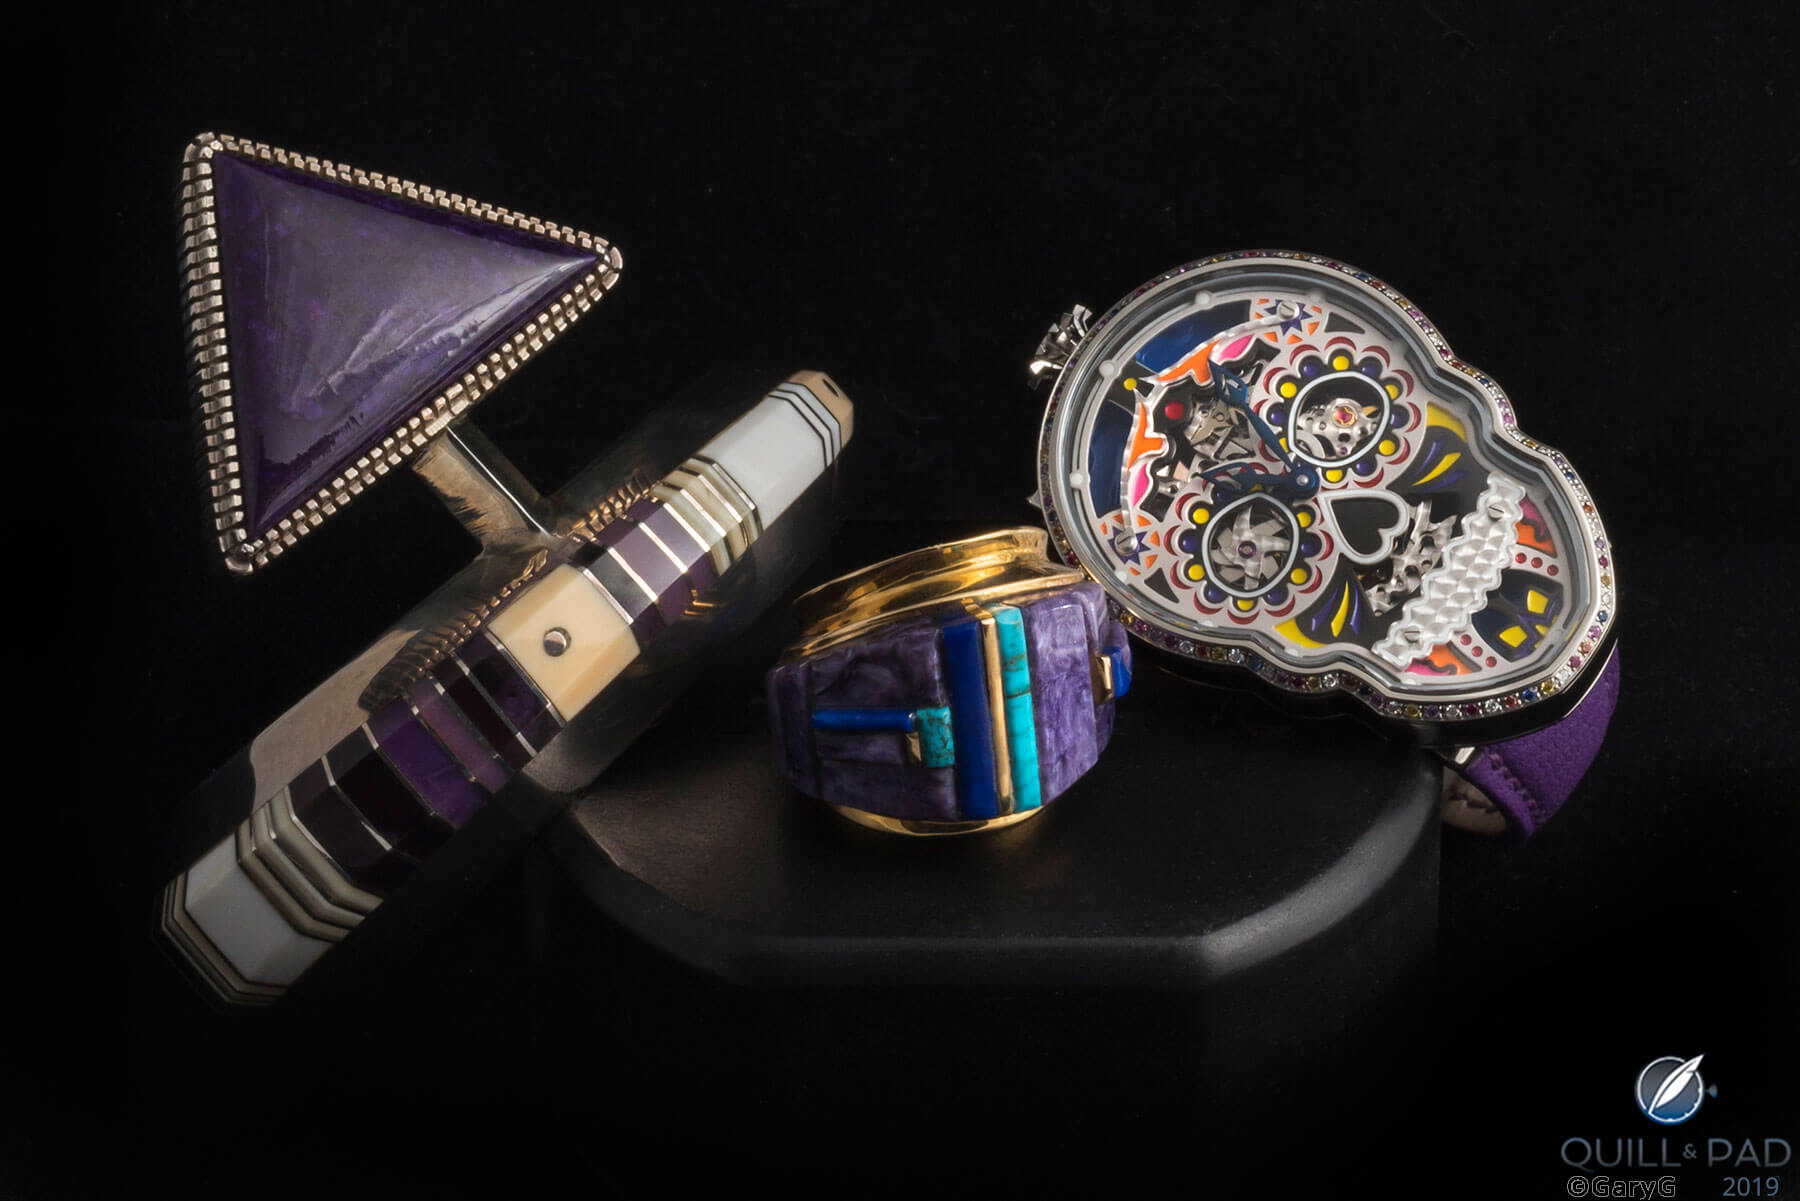 Color coded: Fiona Krüger Petit Skull (Celebration) Eternity on purple strap with jewelry by noted Native American artists Gibson Nez (left) and Charles Loloma (center)